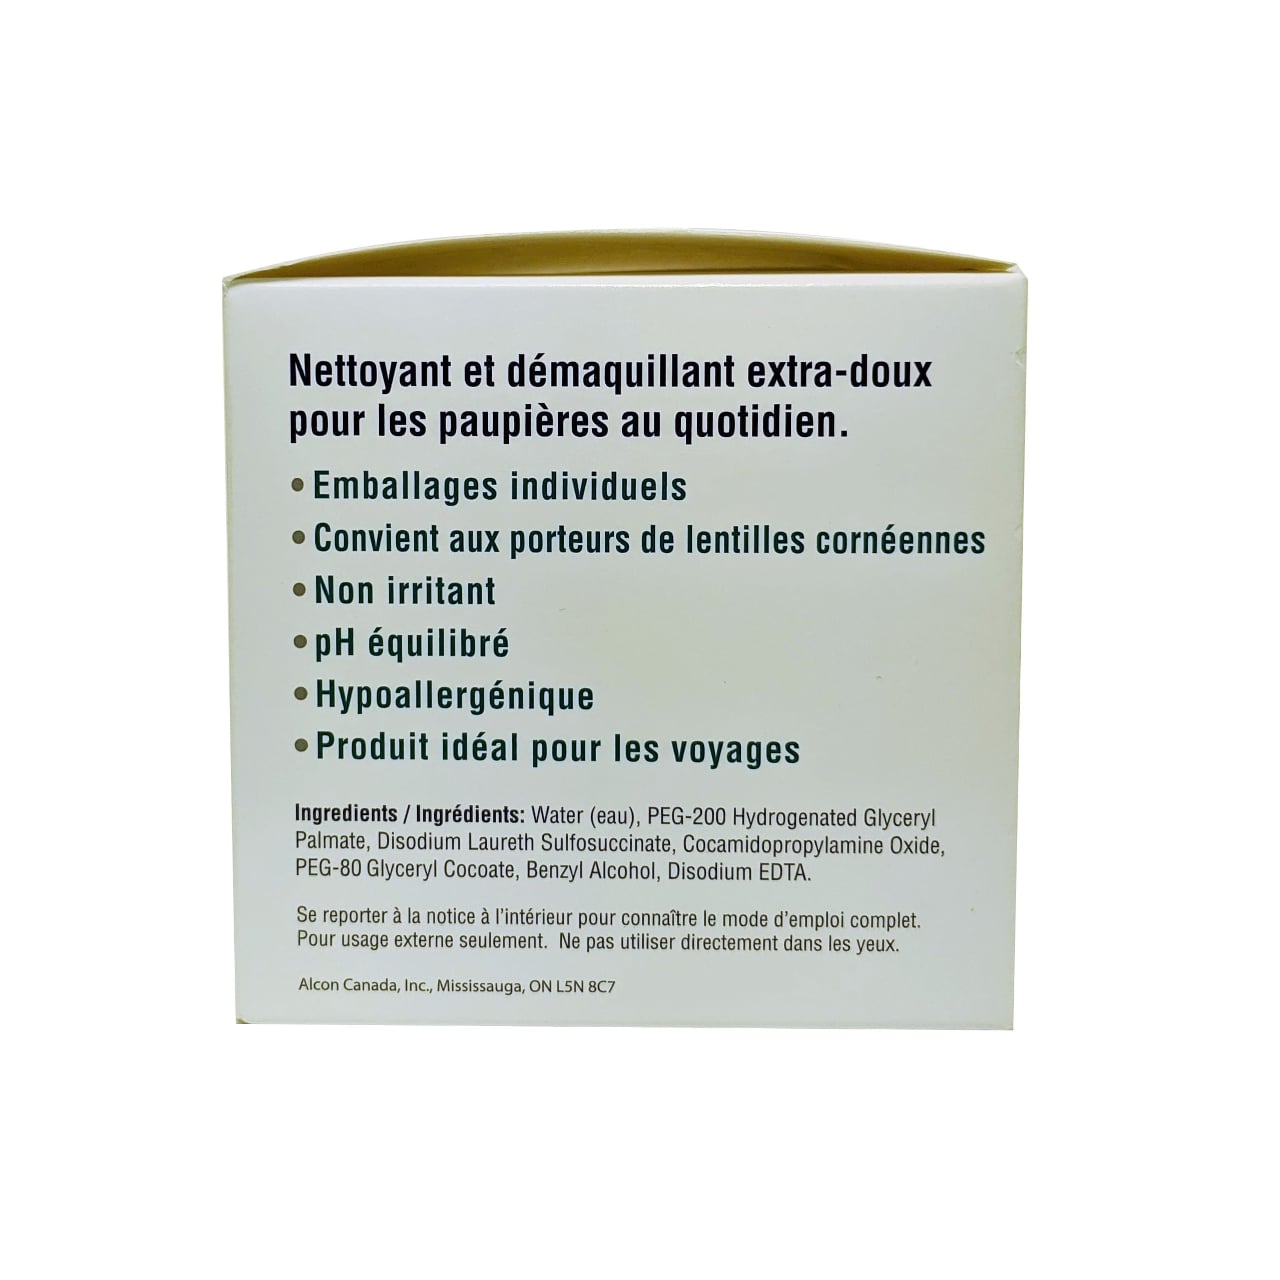 Package details and ingredients for Alcon Lid-Care Towelettes in French